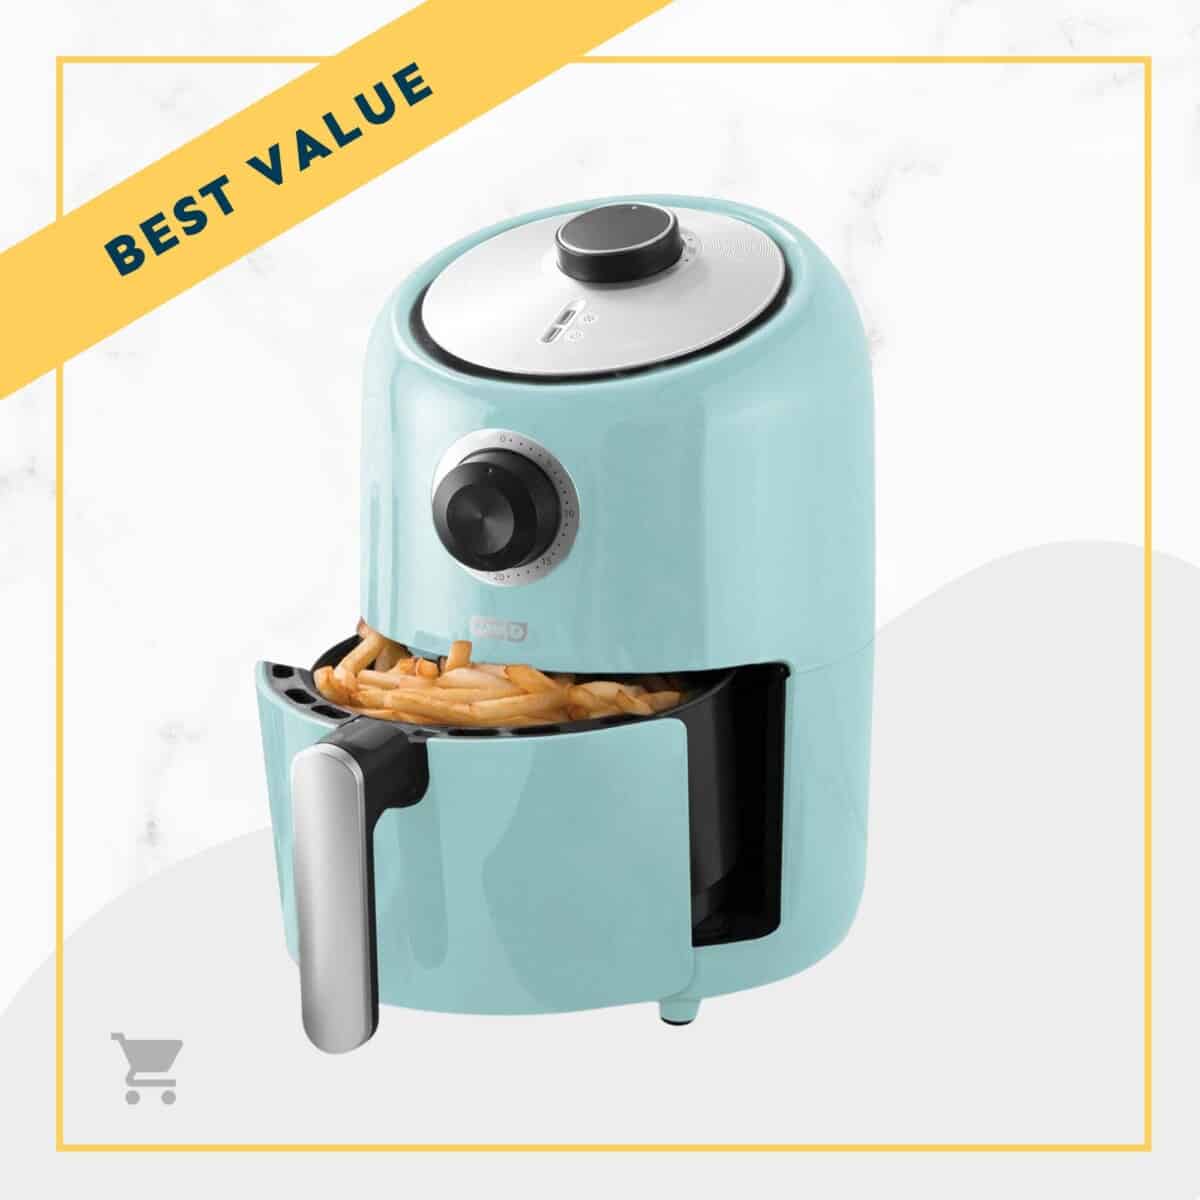 A blue fryer with the text best value.